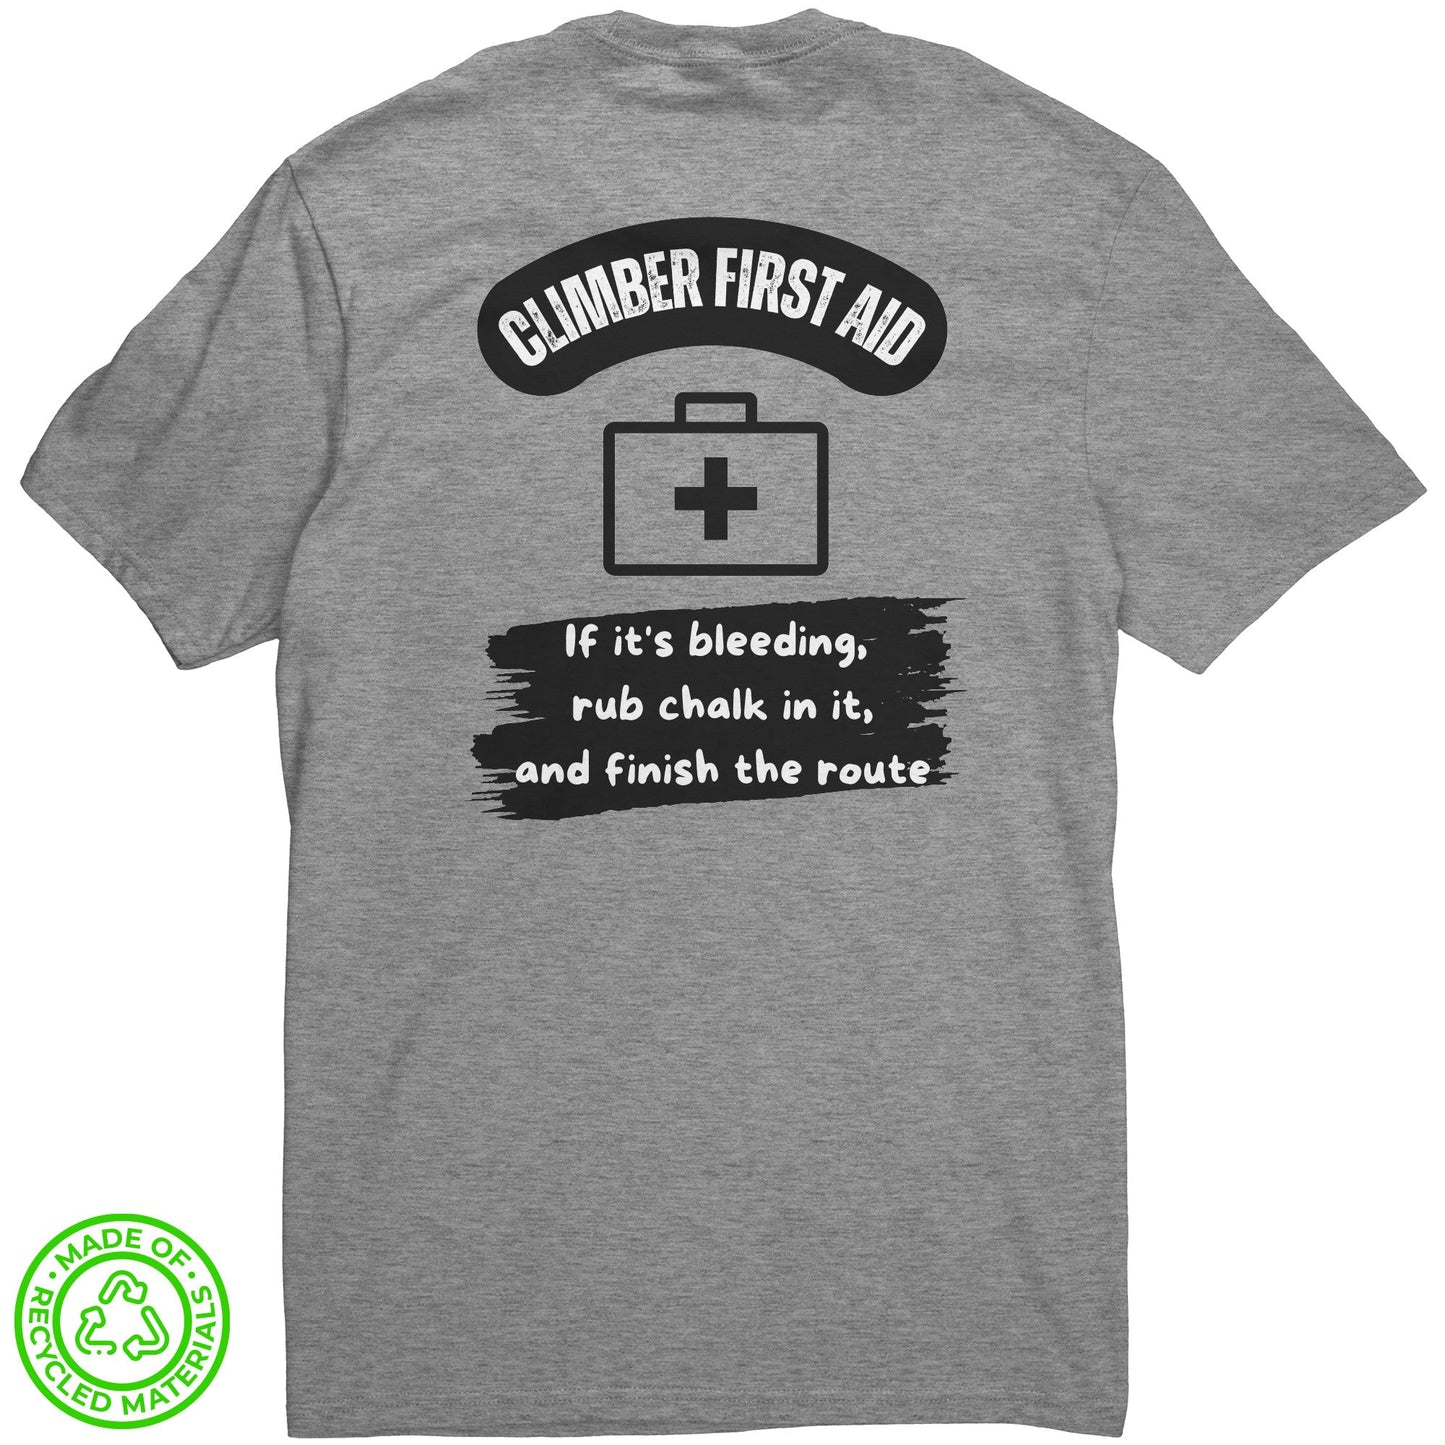 Eco-Friendly Re-Tee (Climber First Aid)